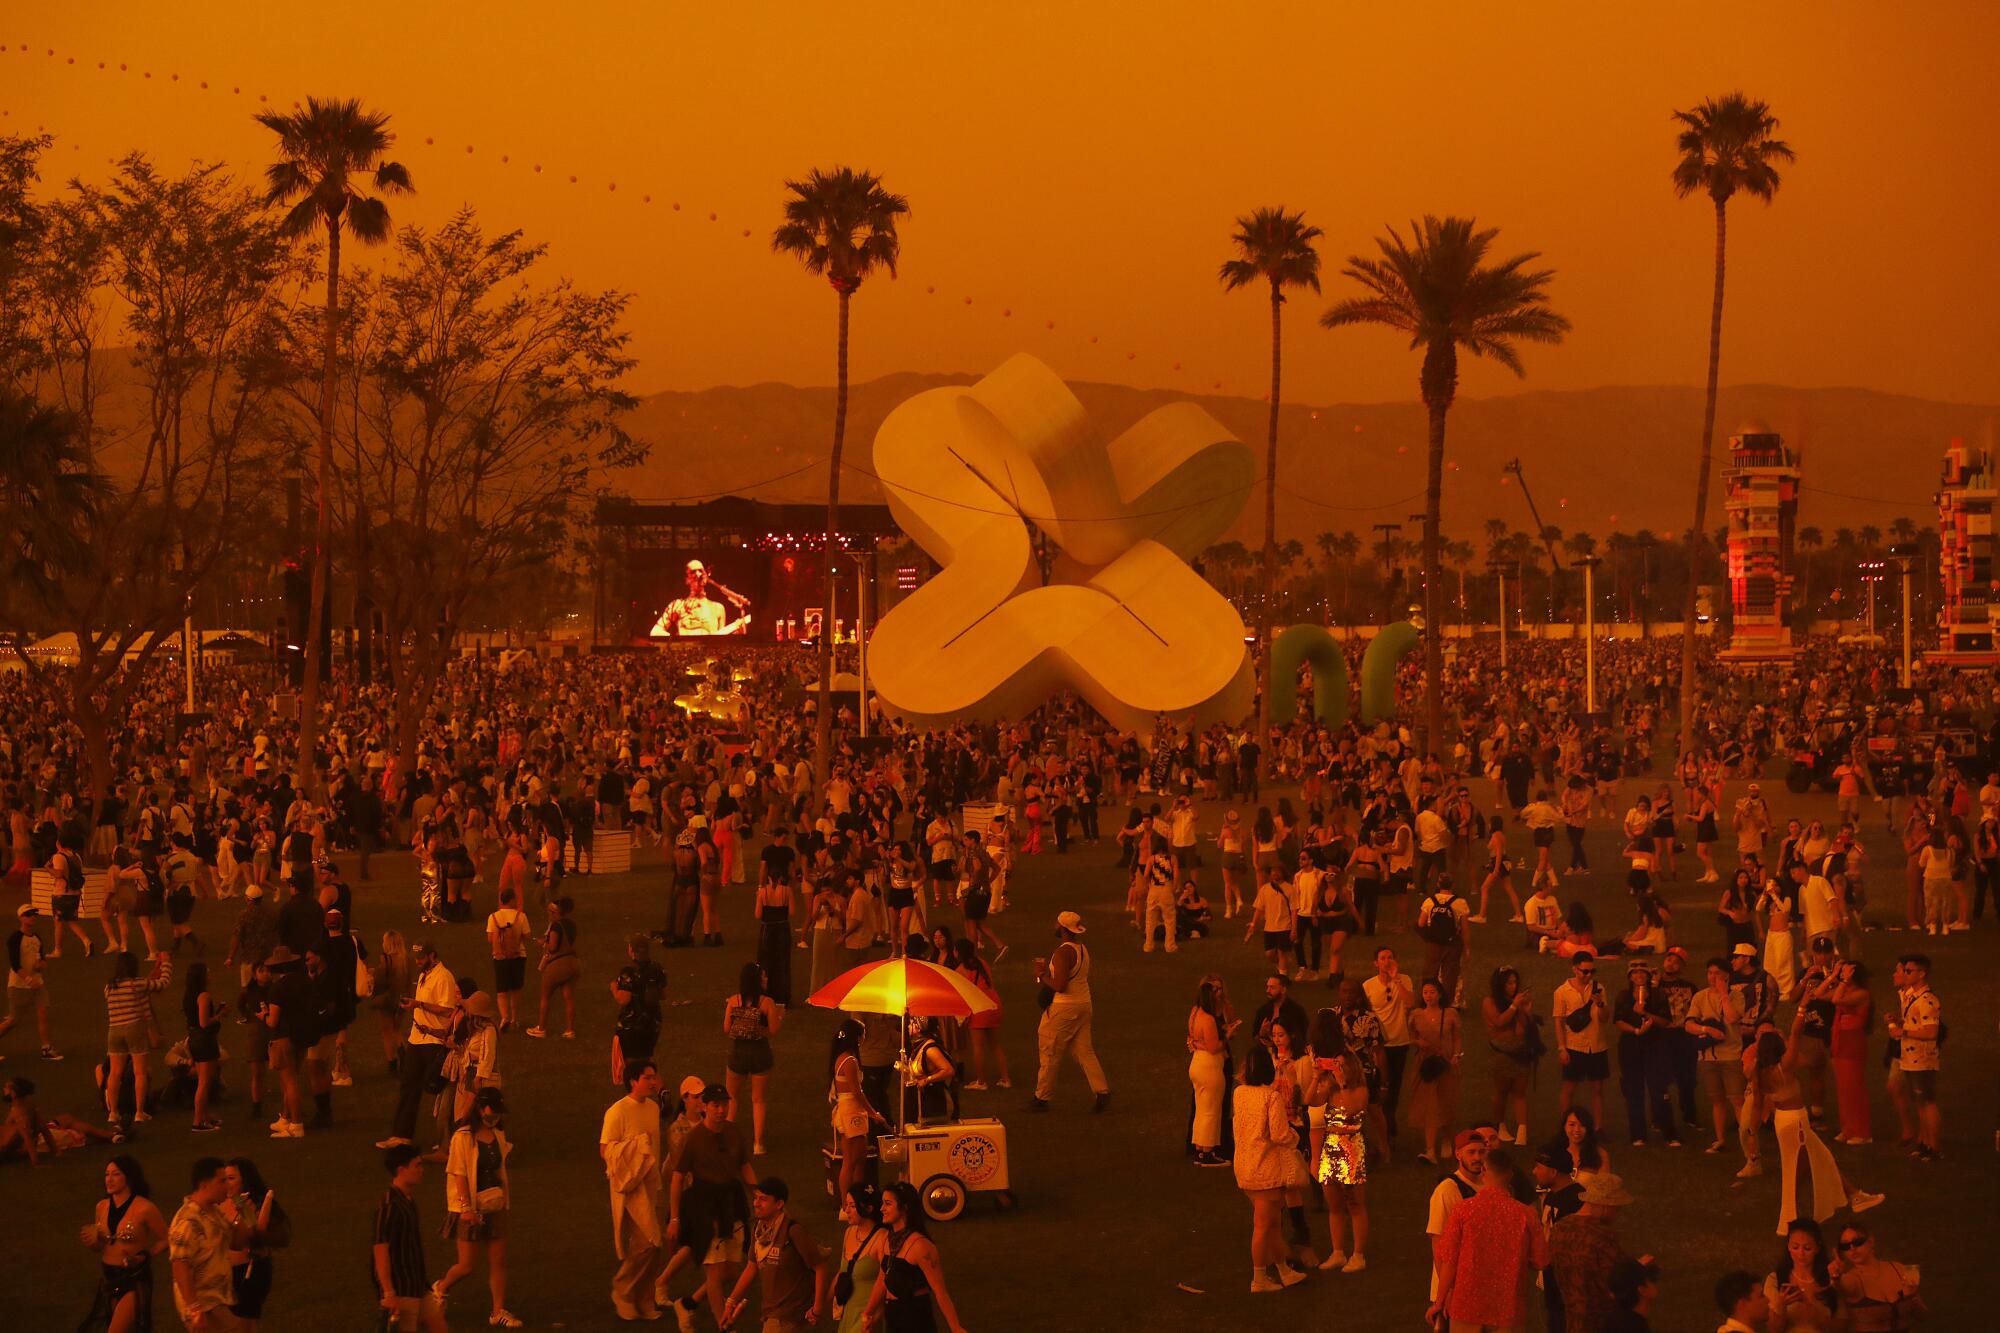 An orange-tinted photo of a crowd of people seen from a distance, mingling in a large, open field lined with palm trees